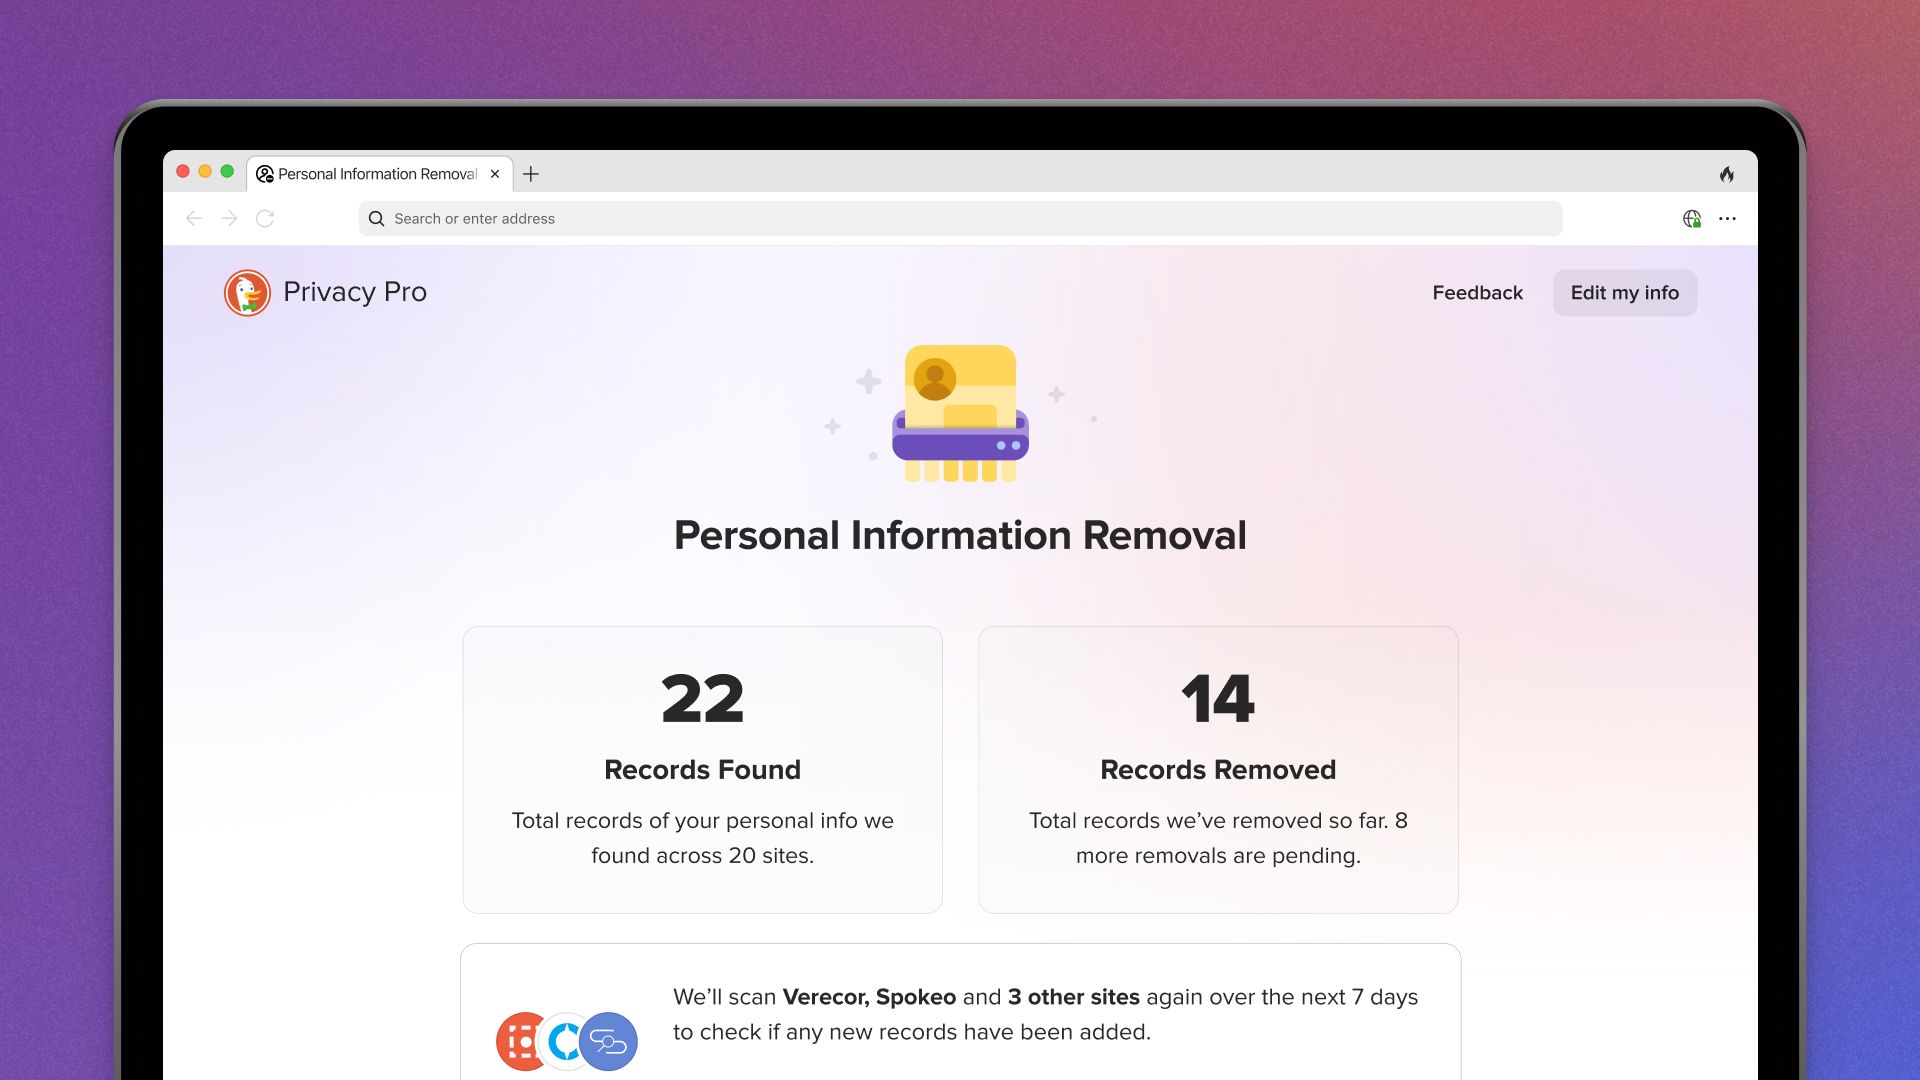 Personal Information Removal dashboard that reads "22 records found" and "14 records removed"